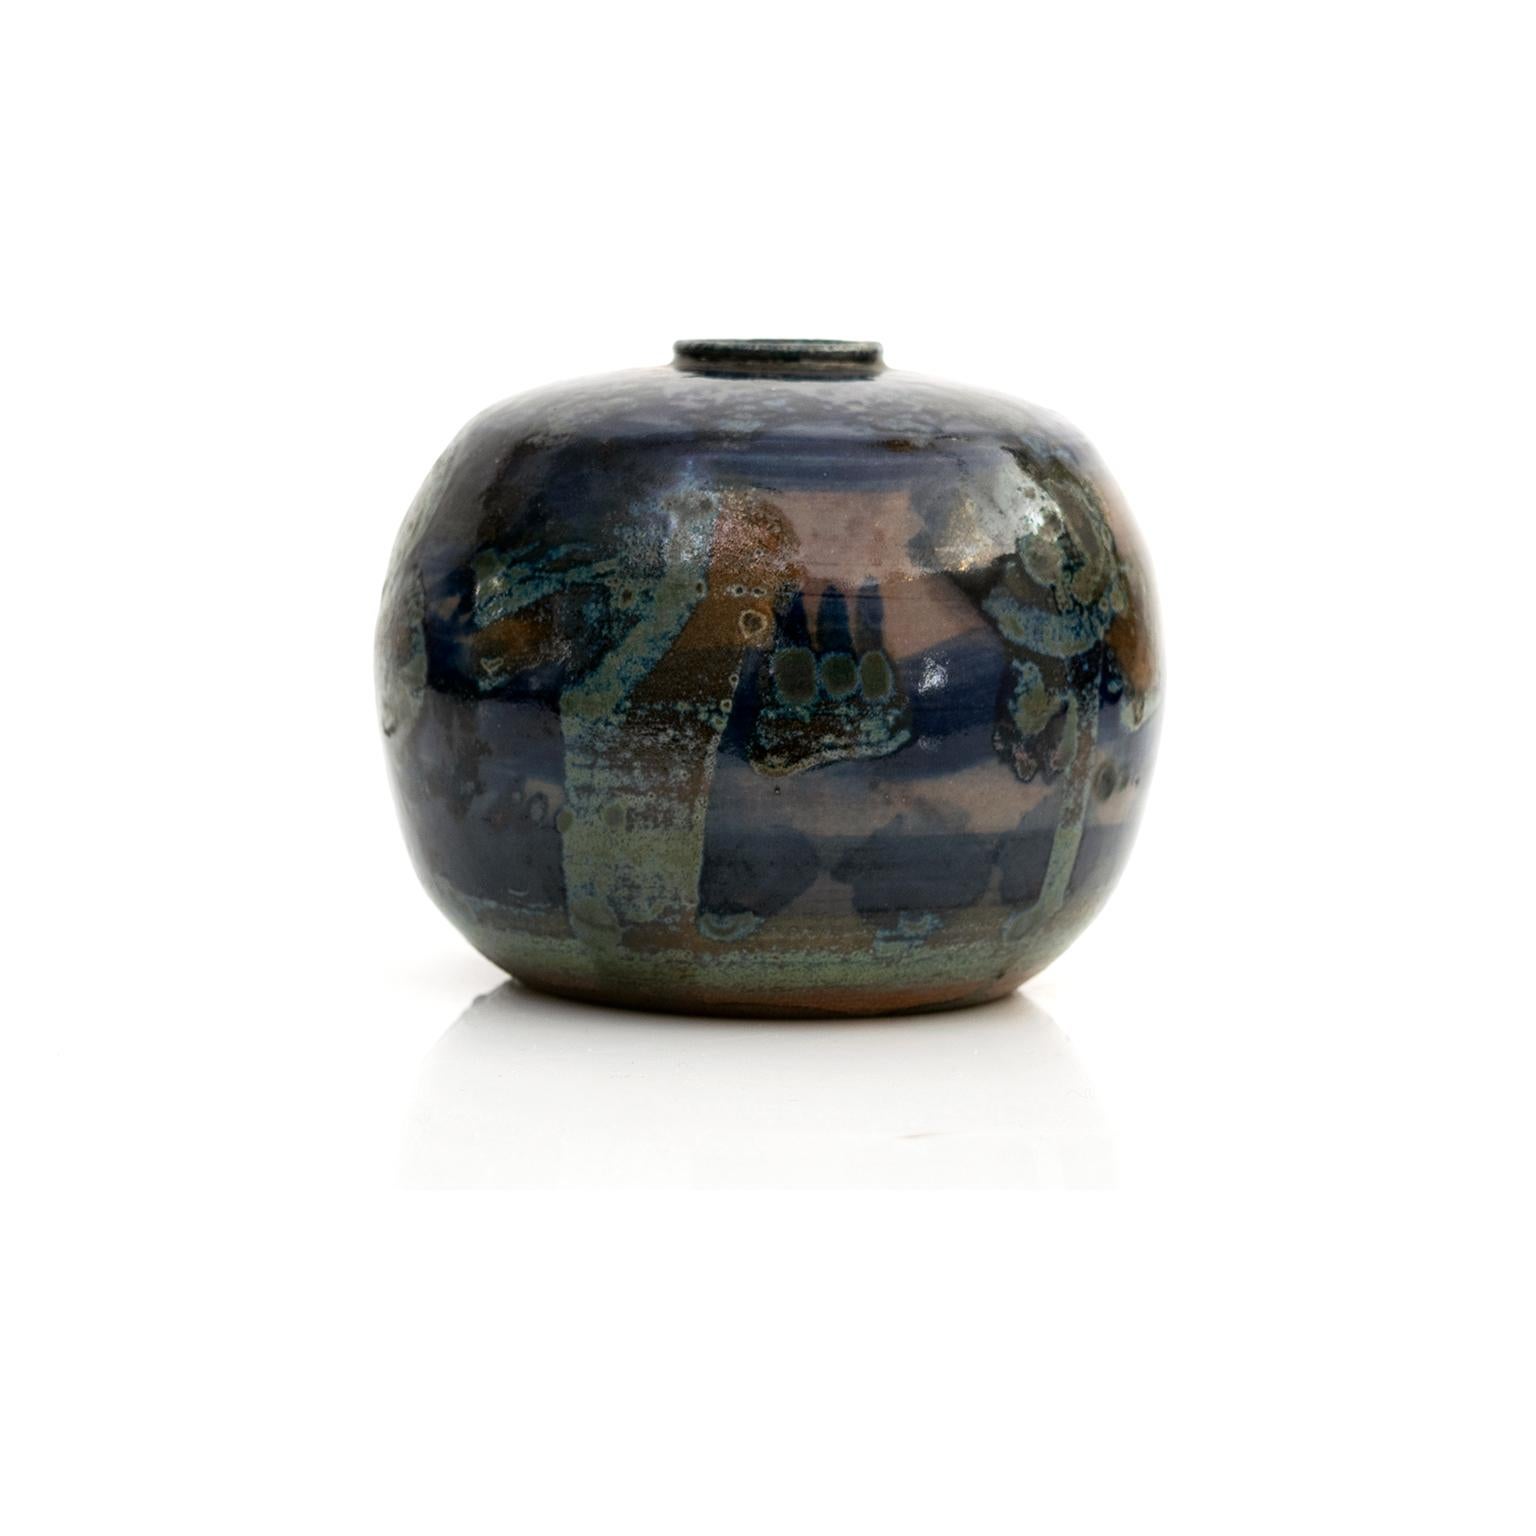 Unique studio vase by Carl-Harry Stalhane created at Rorstrand Studio, Sweden. Hand decorated by Stalhane in green and brown on a deep blue ground. Signed on the bottom, circa 1970.

Measures: Height: 4”. Diameter 4.75”.